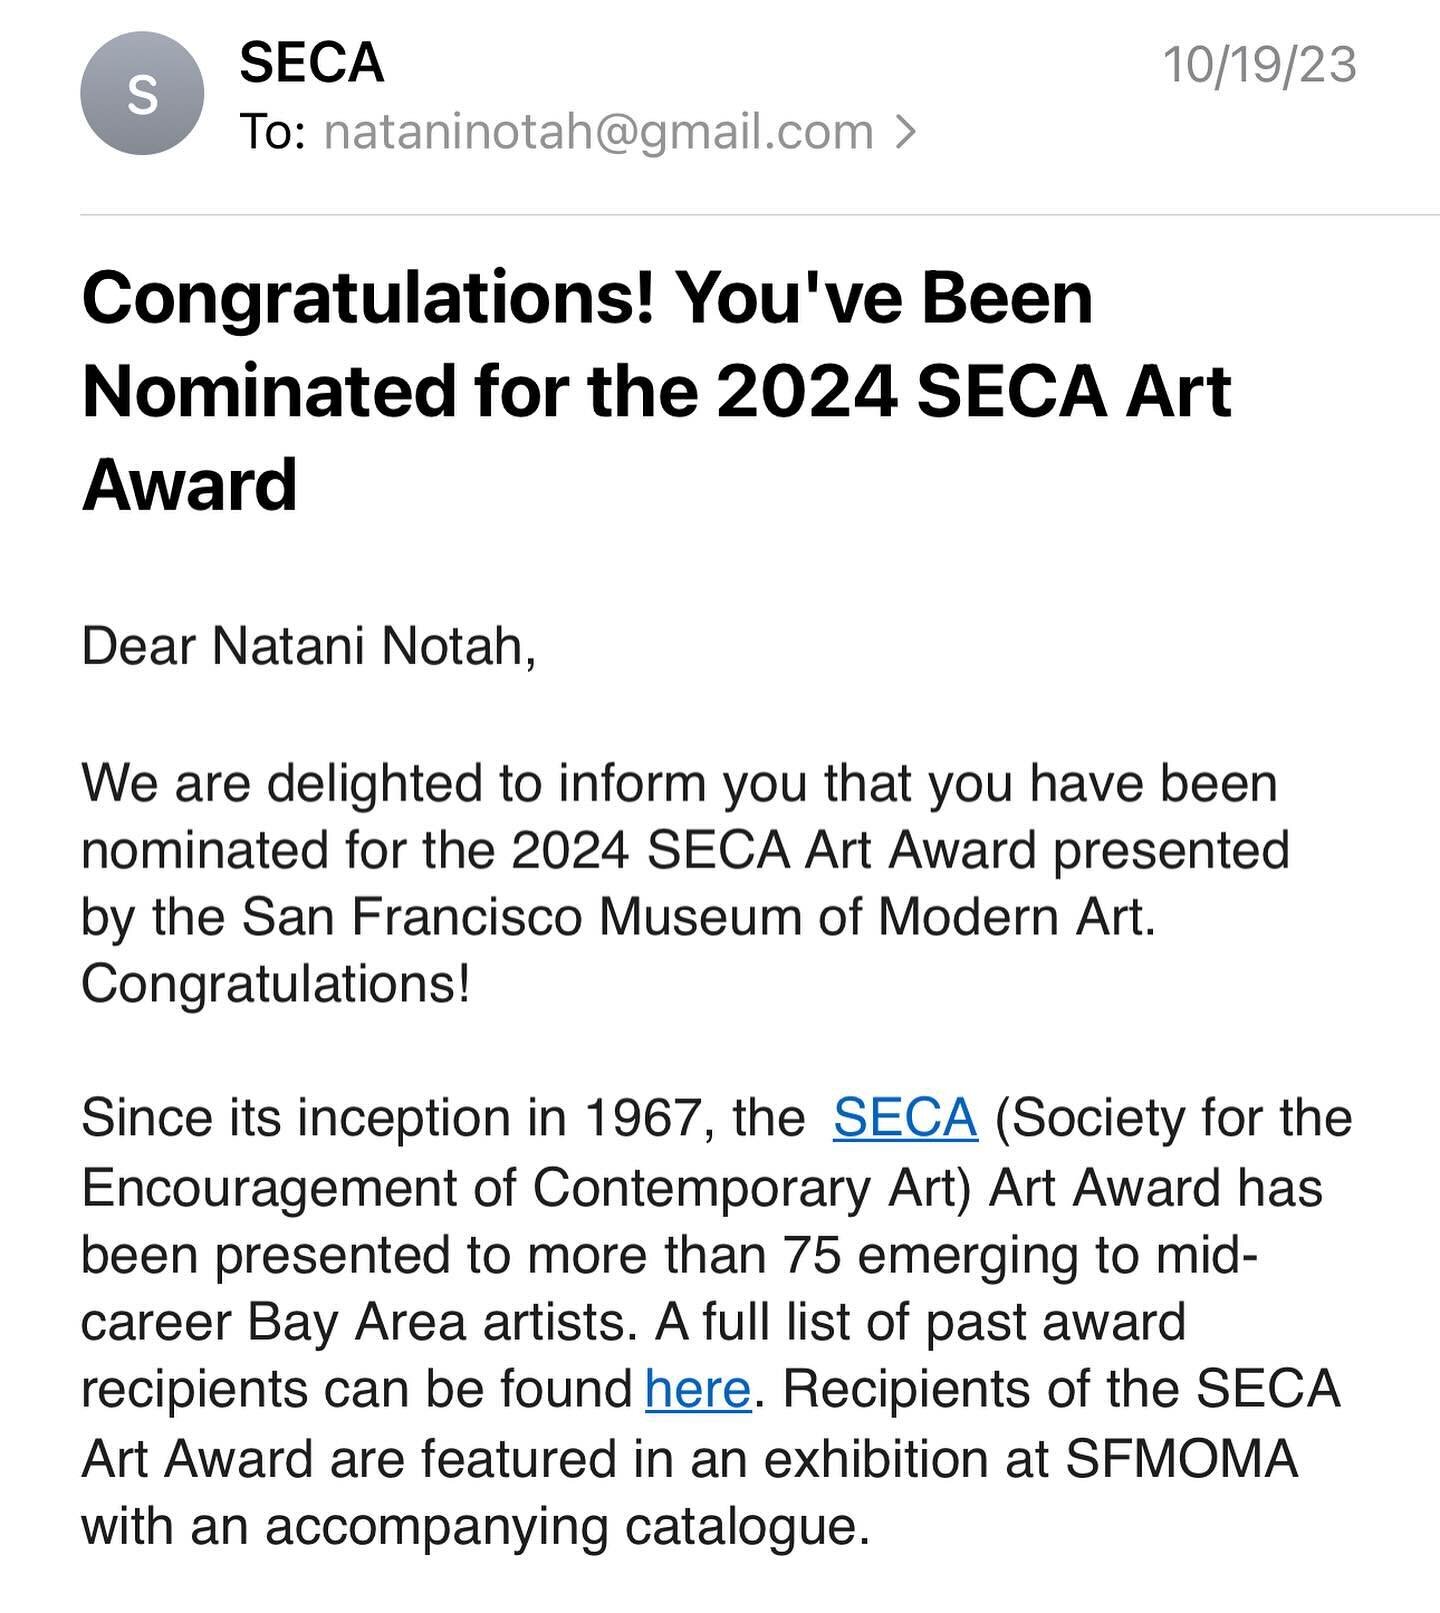 Although I can&rsquo;t apply this year because I&rsquo;m not based in the Bay Area right now, I still wanted to acknowledge this nomination as a win. ✨

I learned, lived, worked, and taught in the Bay Area as a grad student turned practicing artist a